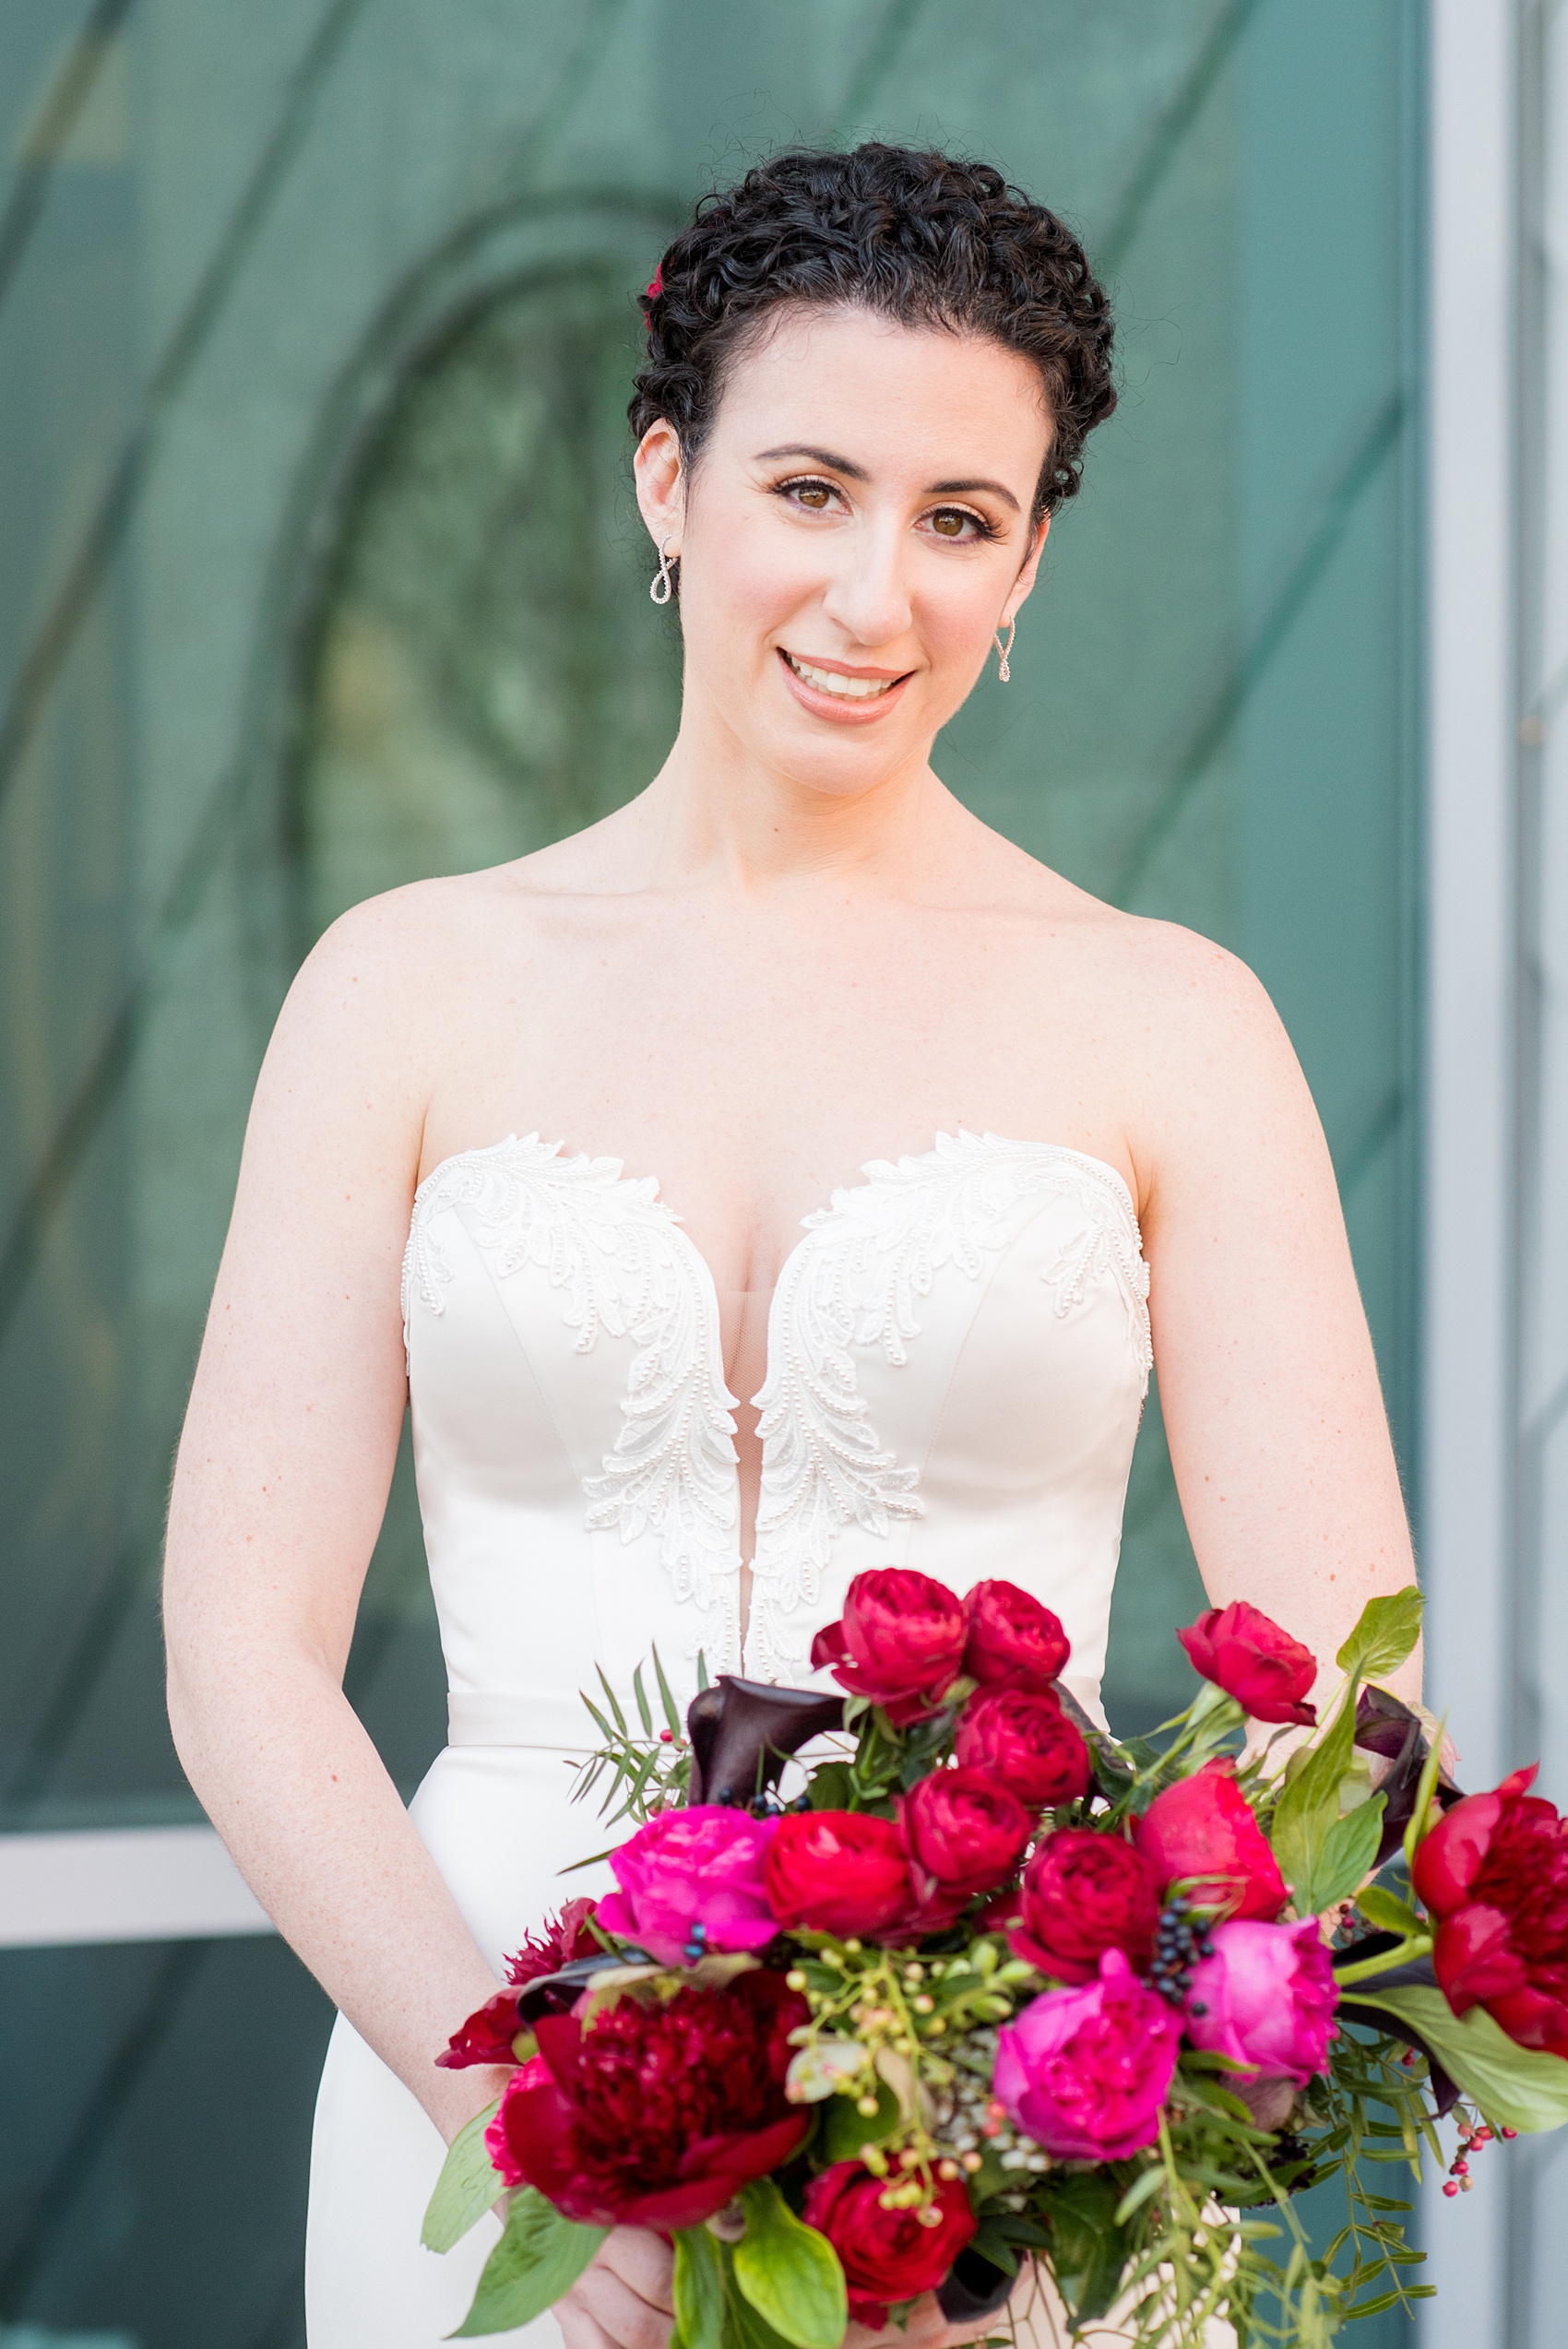 W Hoboken wedding photos by Mikkel Paige Photography at this NJ venue. Pictures in this well known New Jersey city with a view of the NYC skyline. The bride wore a sexy strapless pearl beaded gown with a romantic bouquet, including colors burgundy, fuchsia, and red. Flowers by Sachi Rose Design. #mikkelpaige #HobokenWedding #NewJerseyPhotographer #NewYorkCityPhotographer #NYCweddingphotographer #brideandgroomphotos #redpeonies #romanticwedding #springwedding #CityWedding